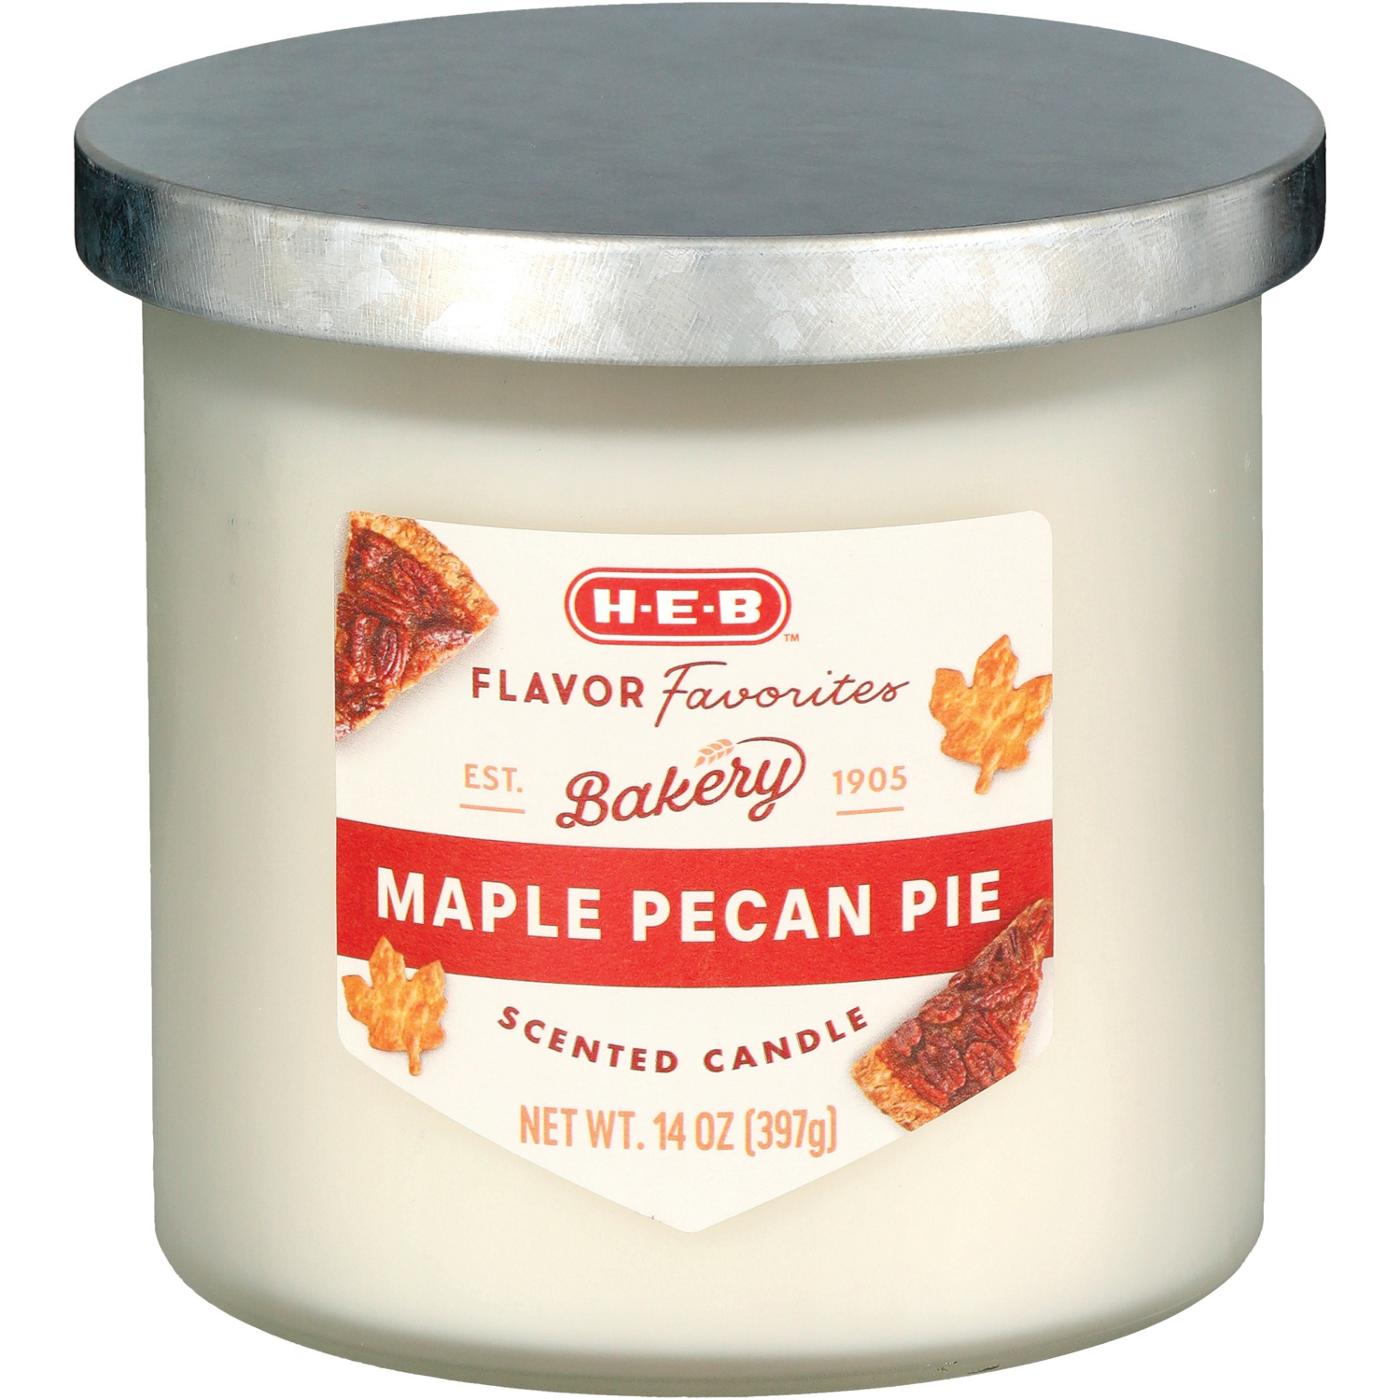 H-E-B Flavor Favorites Maple Pecan Pie Scented Candle; image 2 of 2